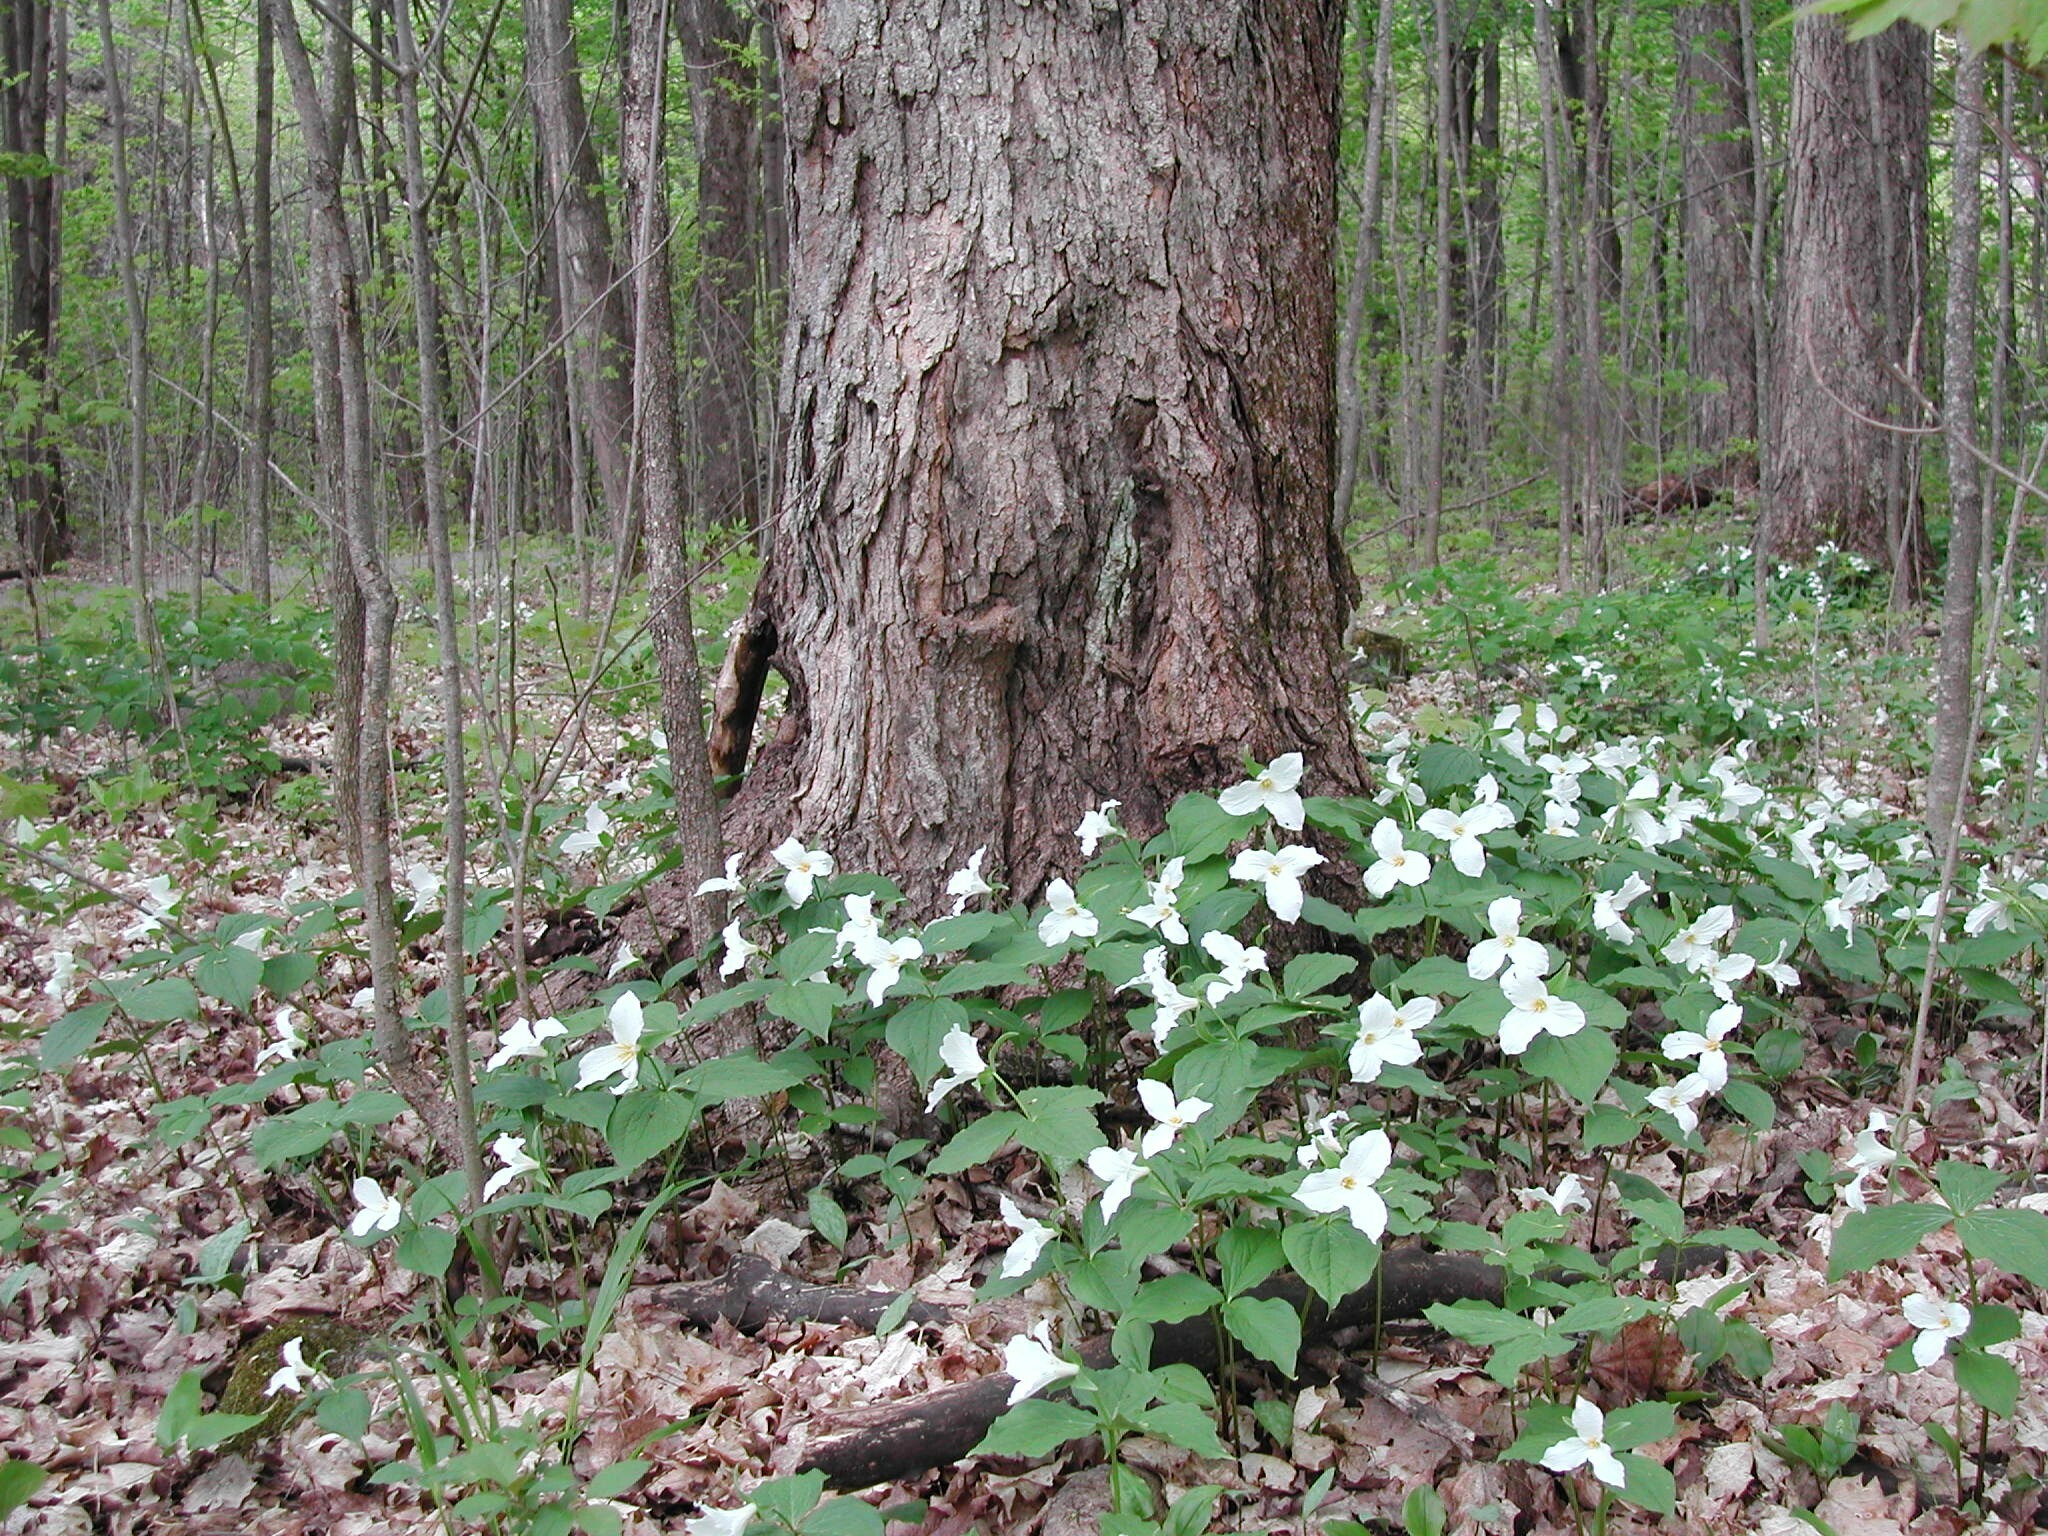 Dozens of white trilliums surrounding a tree in the forest